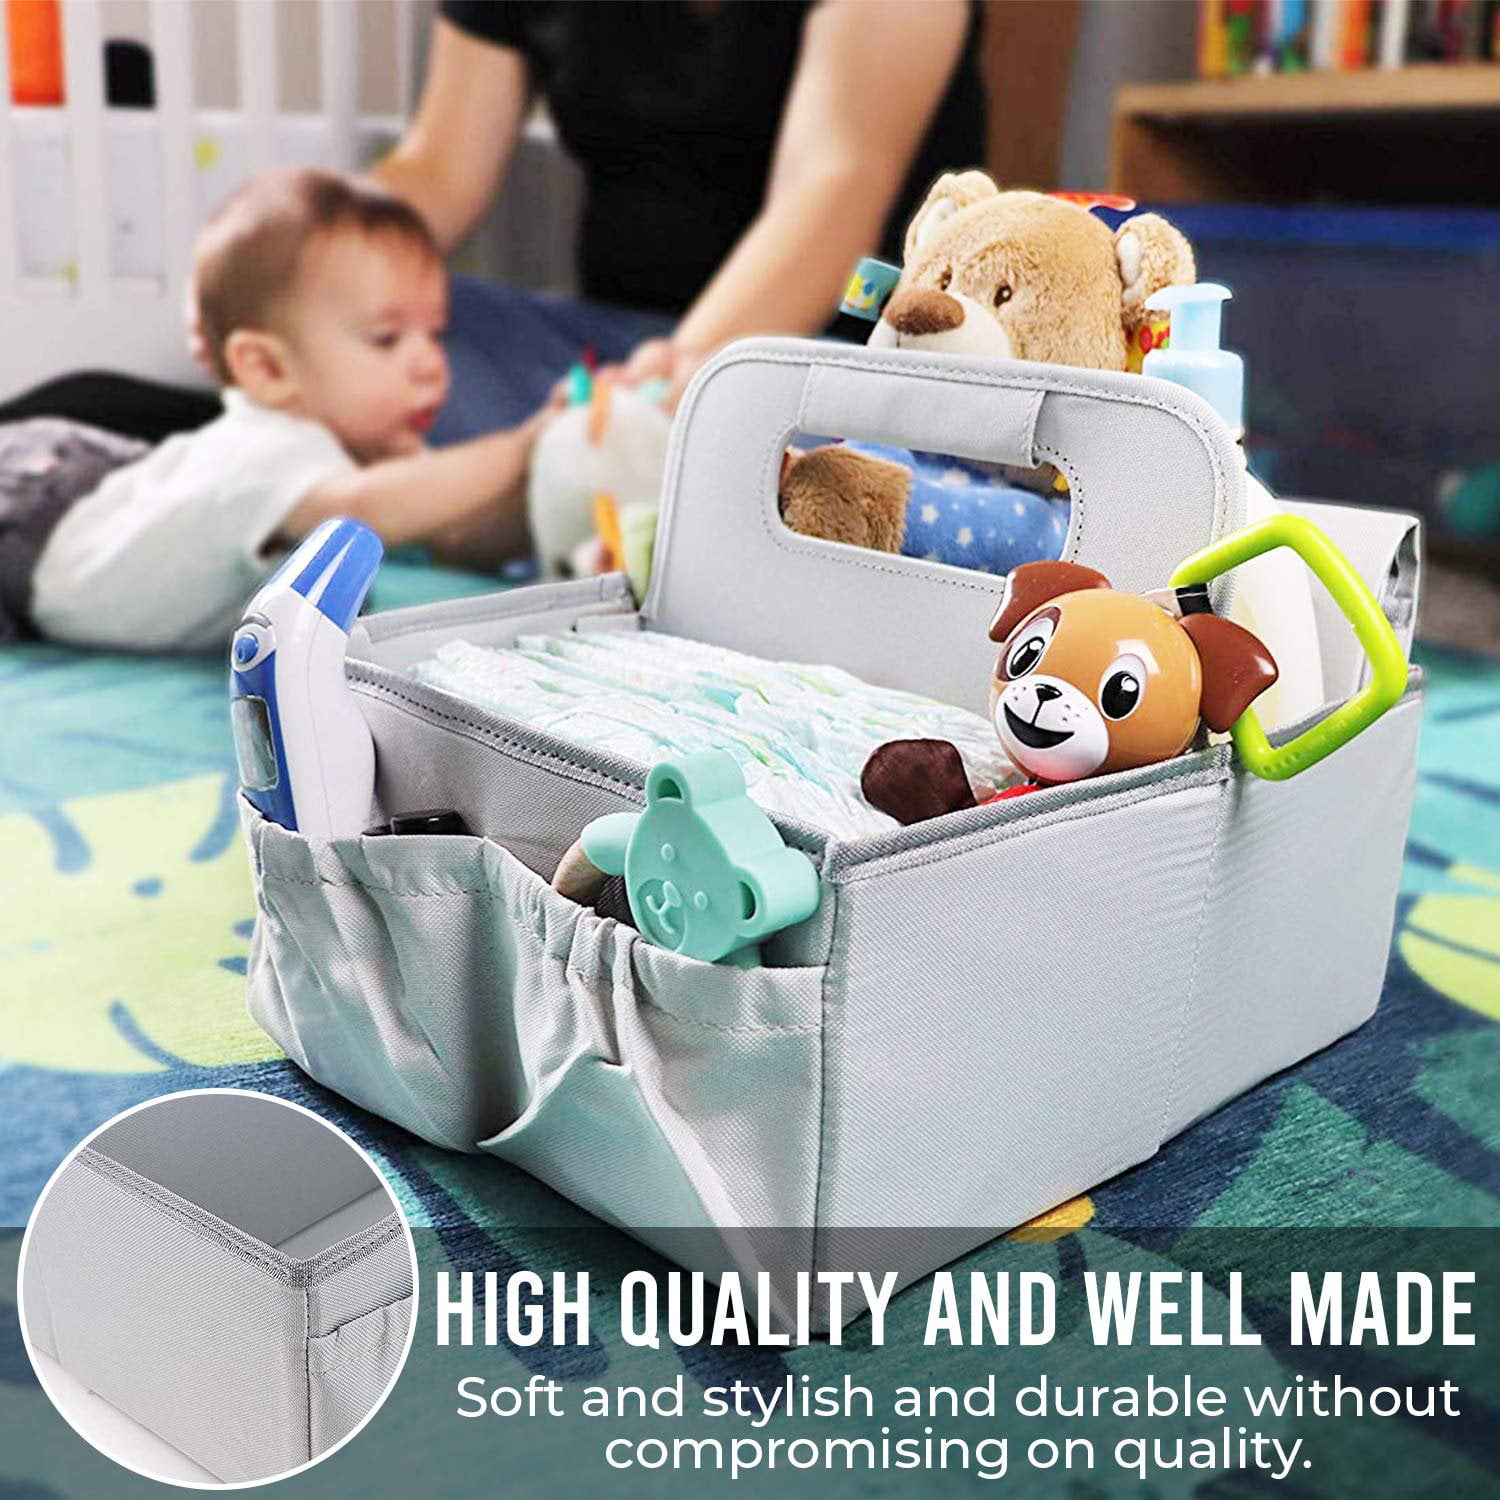  Diaper Caddy With Shoulder Strap & Entertainment Pouch Keeps  Baby Still For Diaper Change. Waterproof Diaper Organizer Canvas Fabric  Wipe Clean. Diaper Caddy Organizer Multiple Compartments (Beige) : Baby